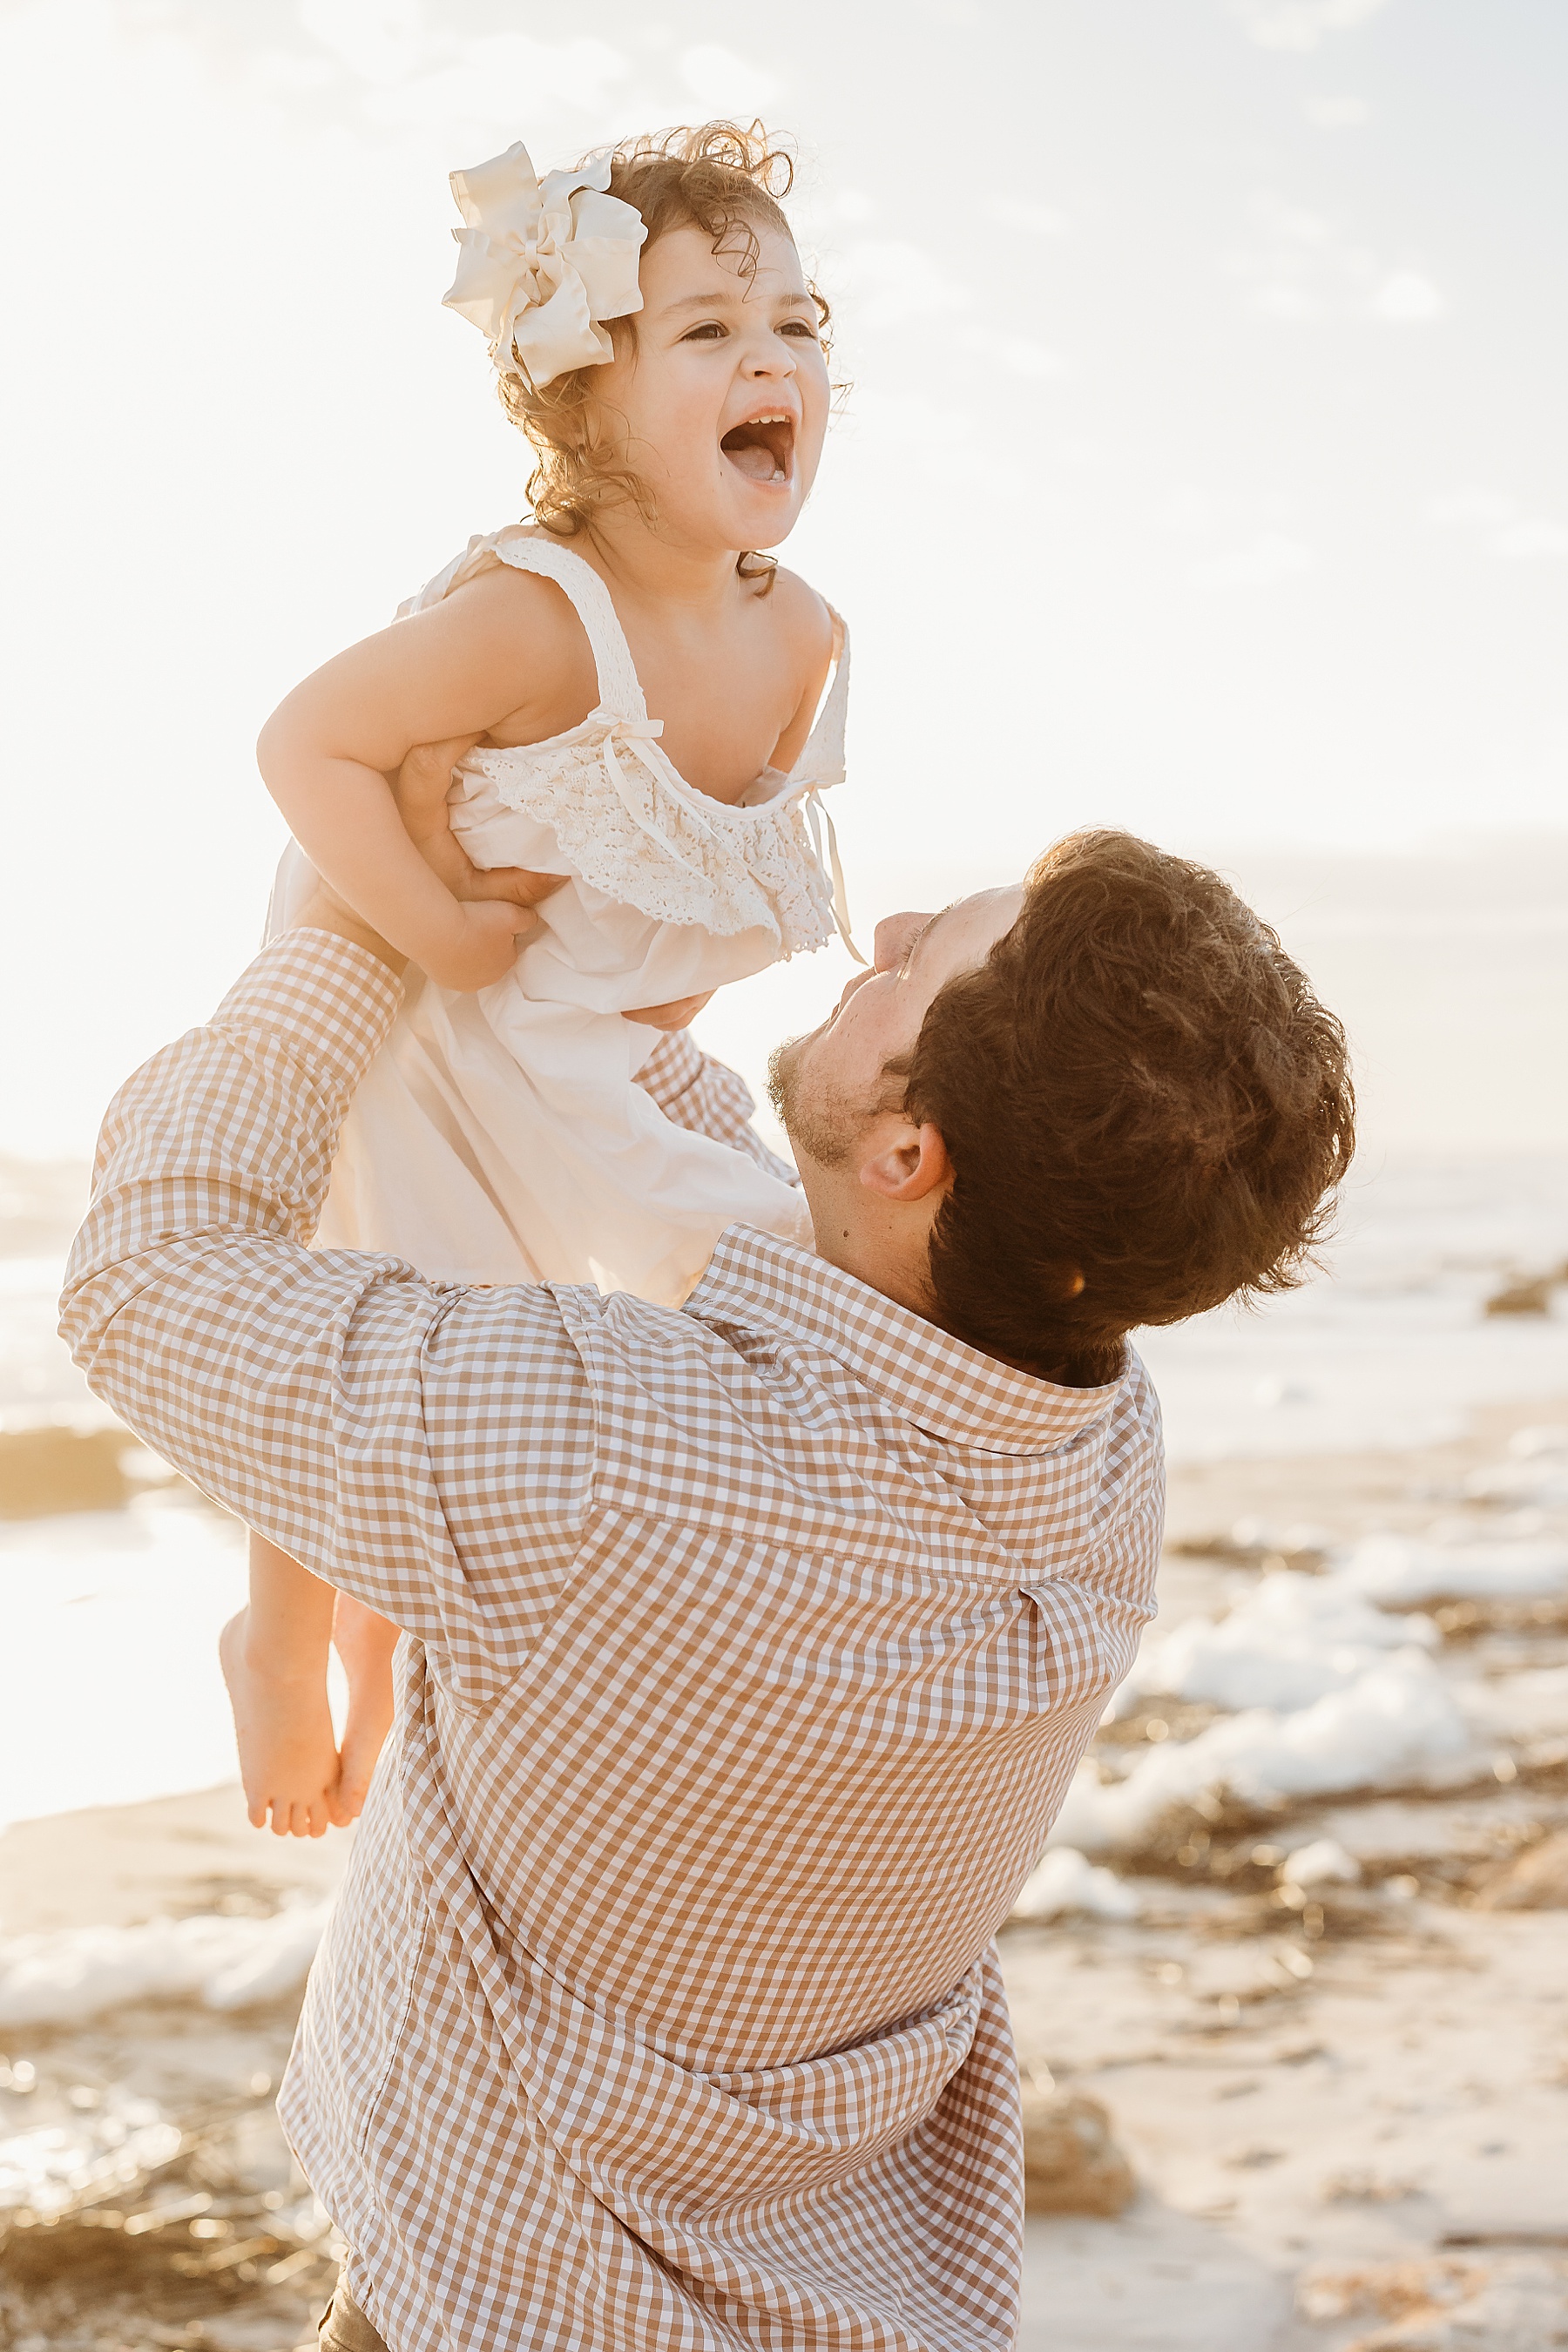 little girl being held in the air by man on the beach at sunrise laughing